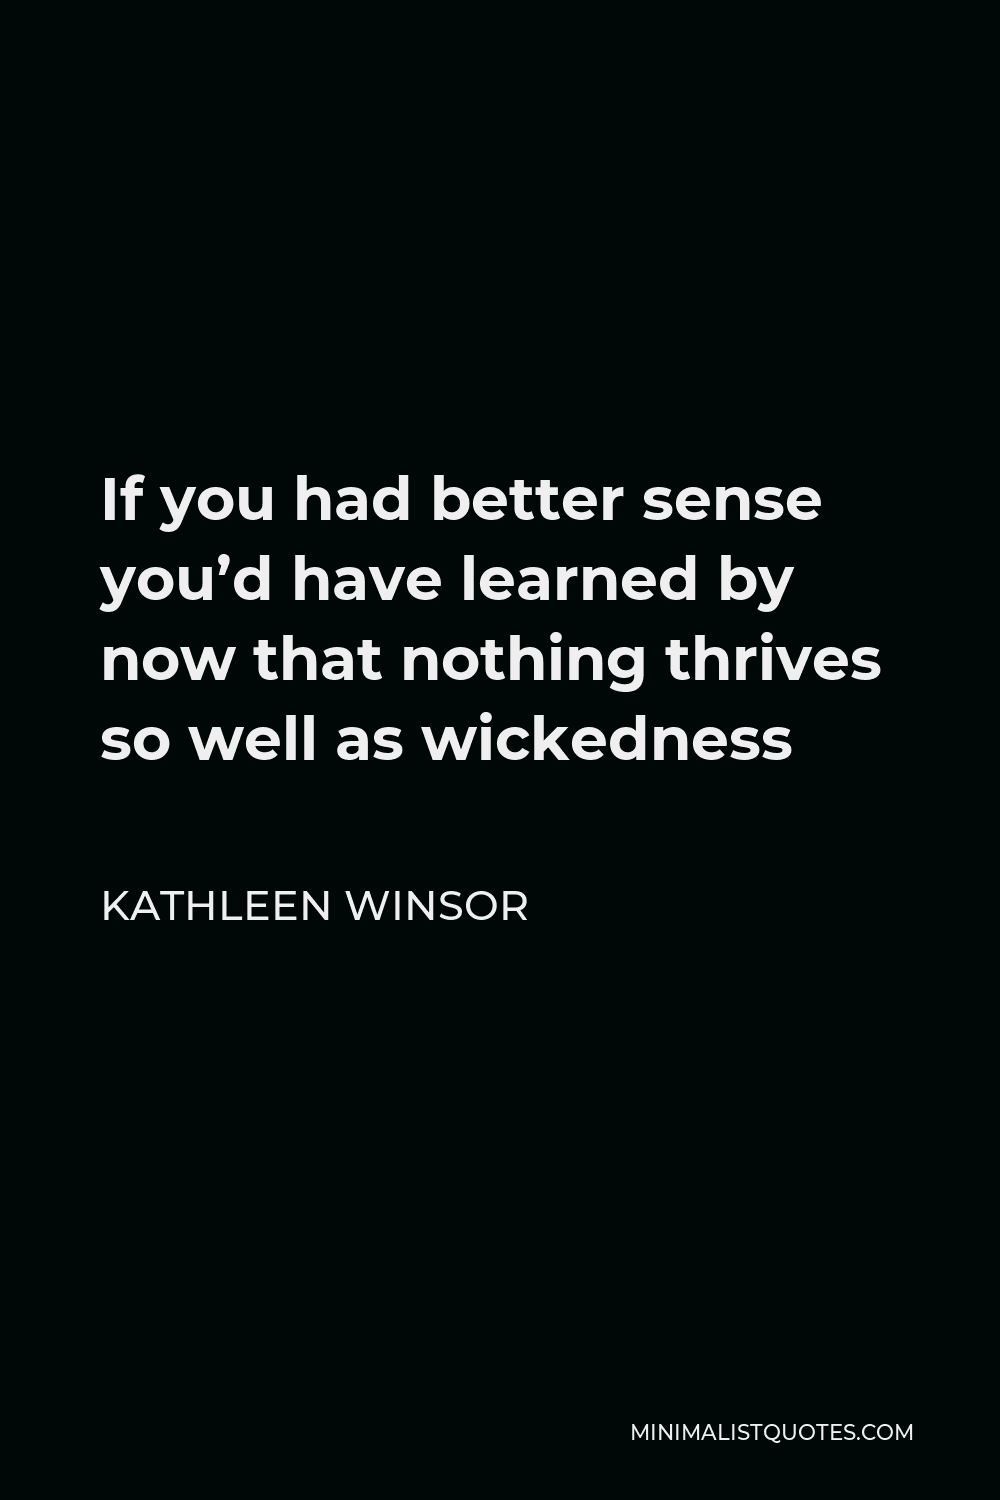 Kathleen Winsor Quote - If you had better sense you’d have learned by now that nothing thrives so well as wickedness